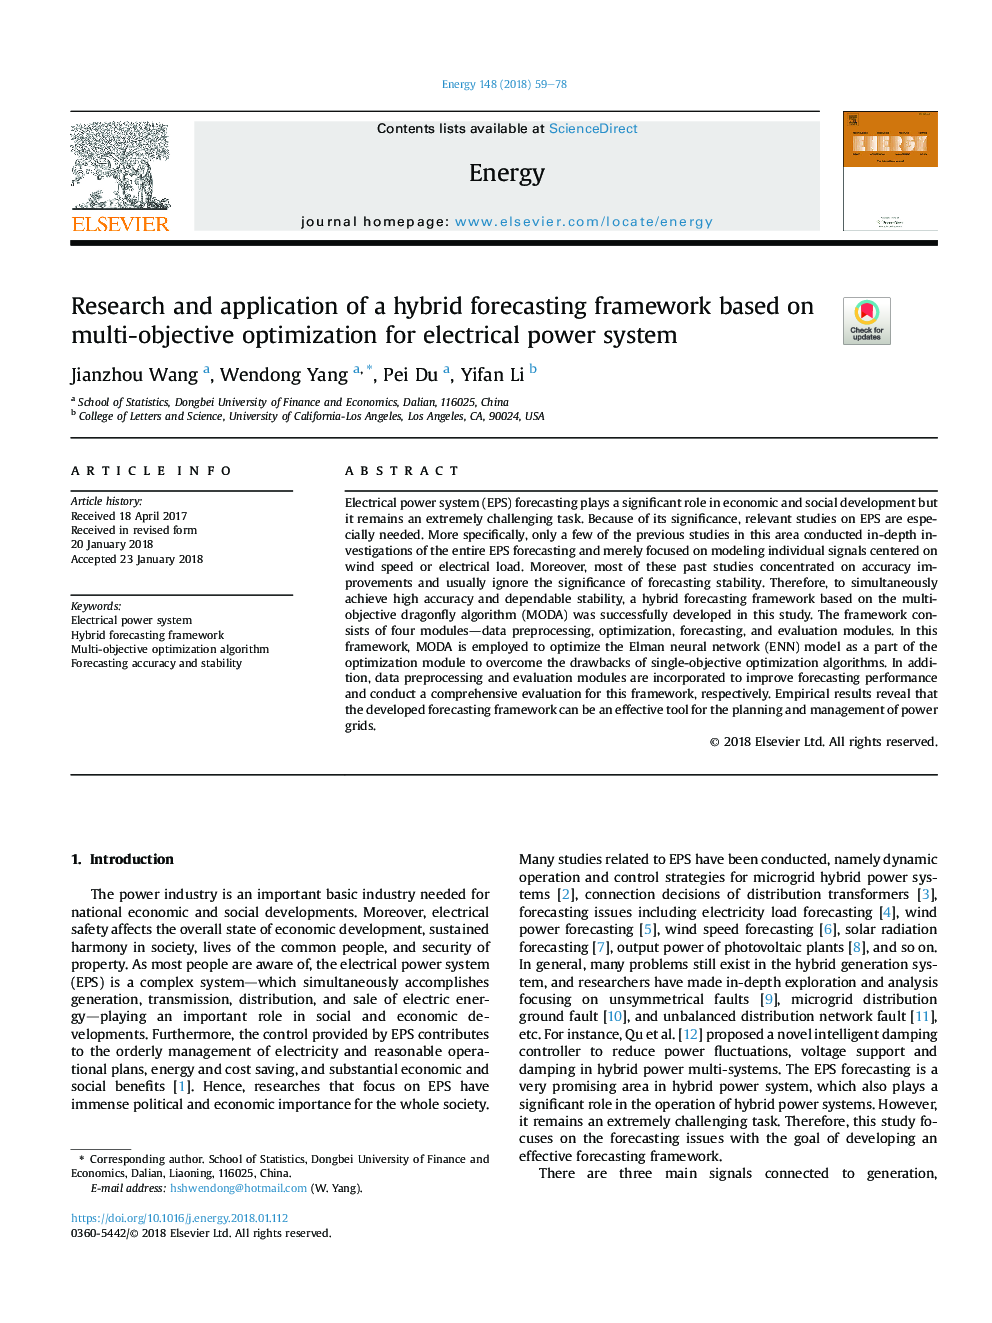 Research and application of a hybrid forecasting framework based on multi-objective optimization for electrical power system